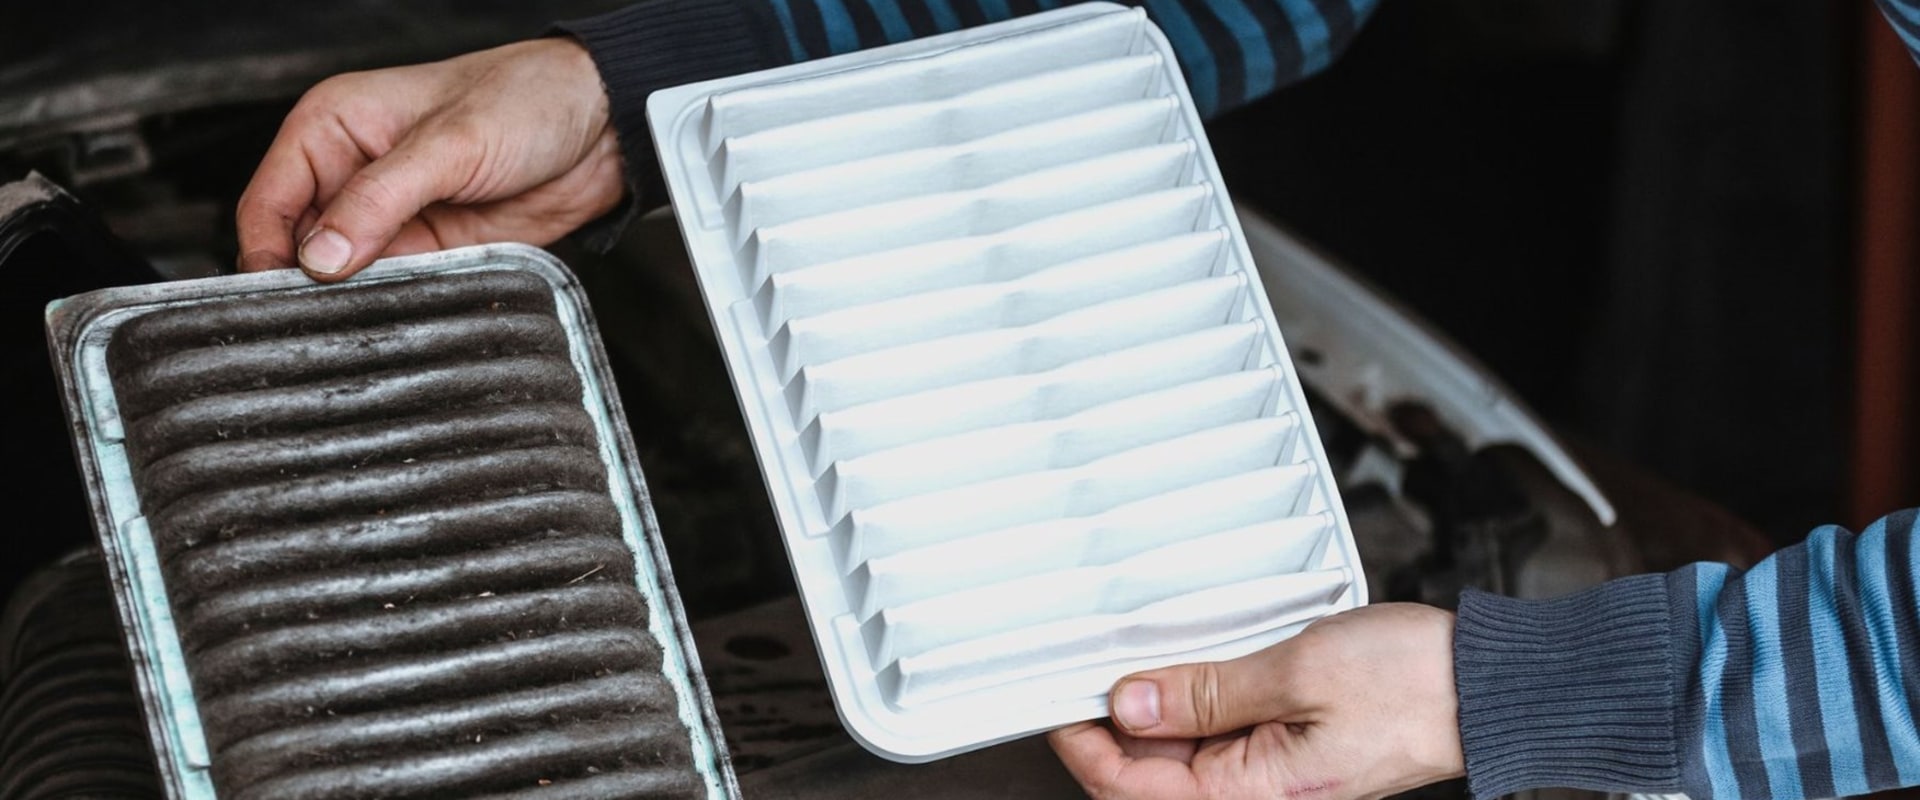 All You Need to Know About Cleaning Air Filters for Your Replica Engine